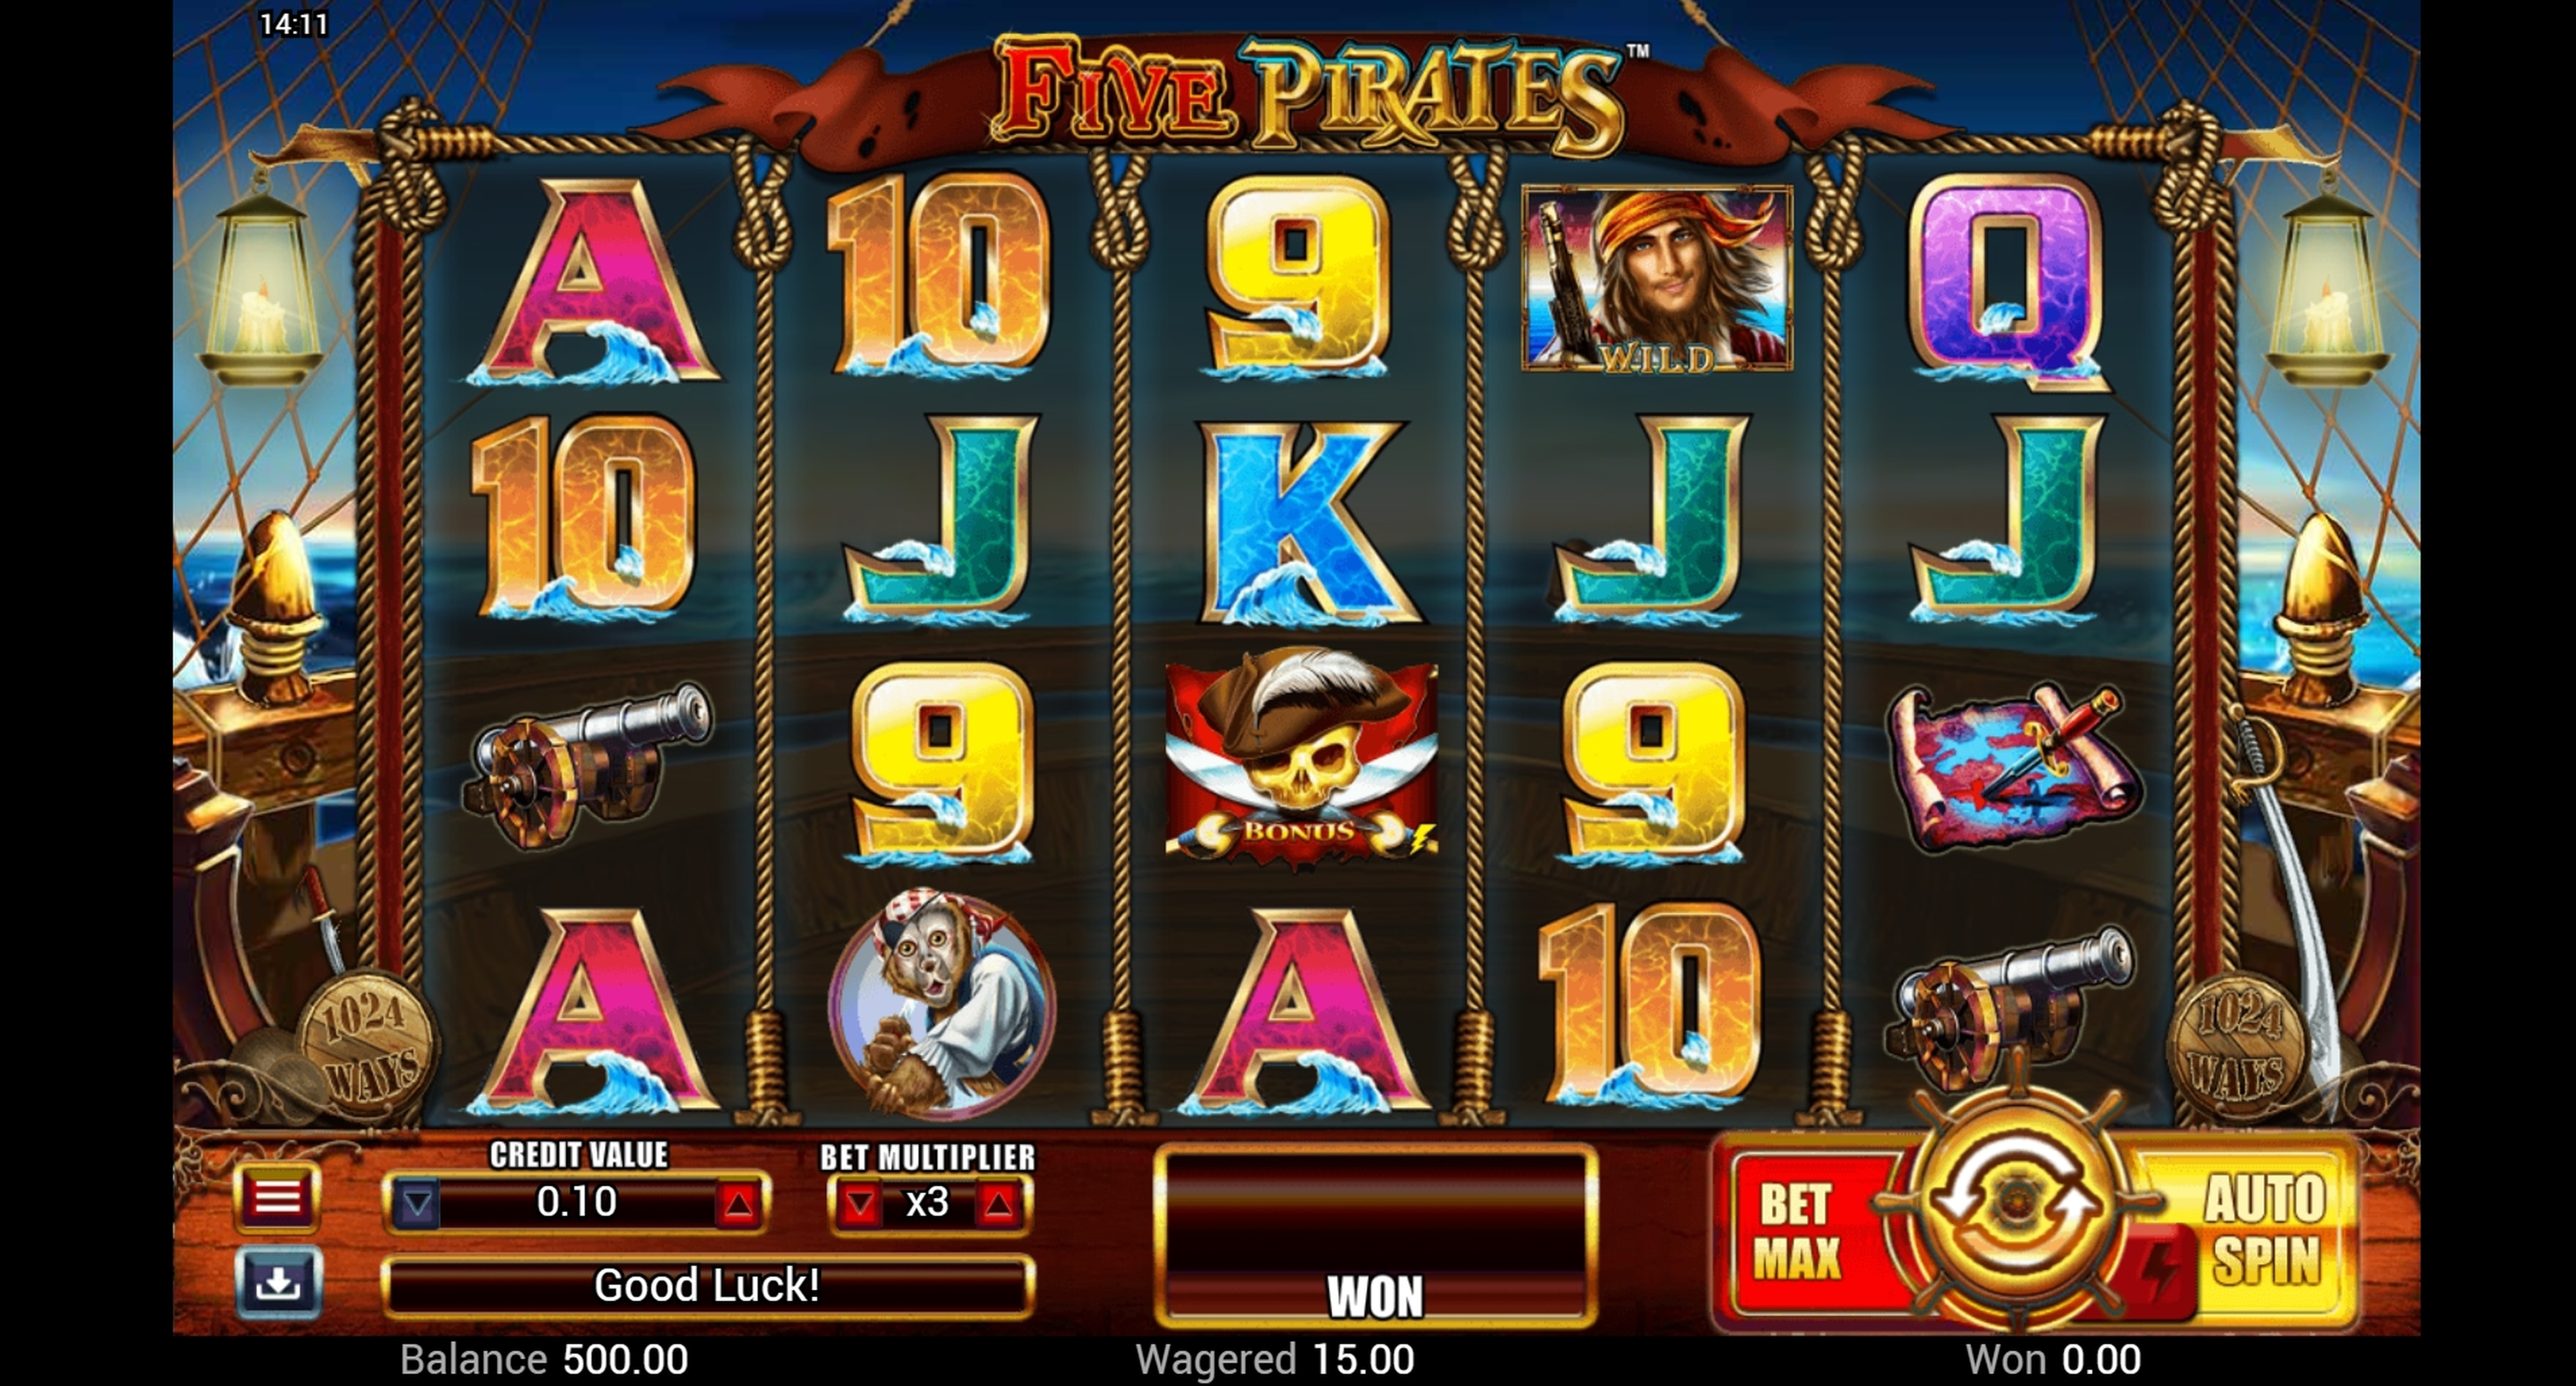 Reels in Five Pirates Slot Game by Lightning Box